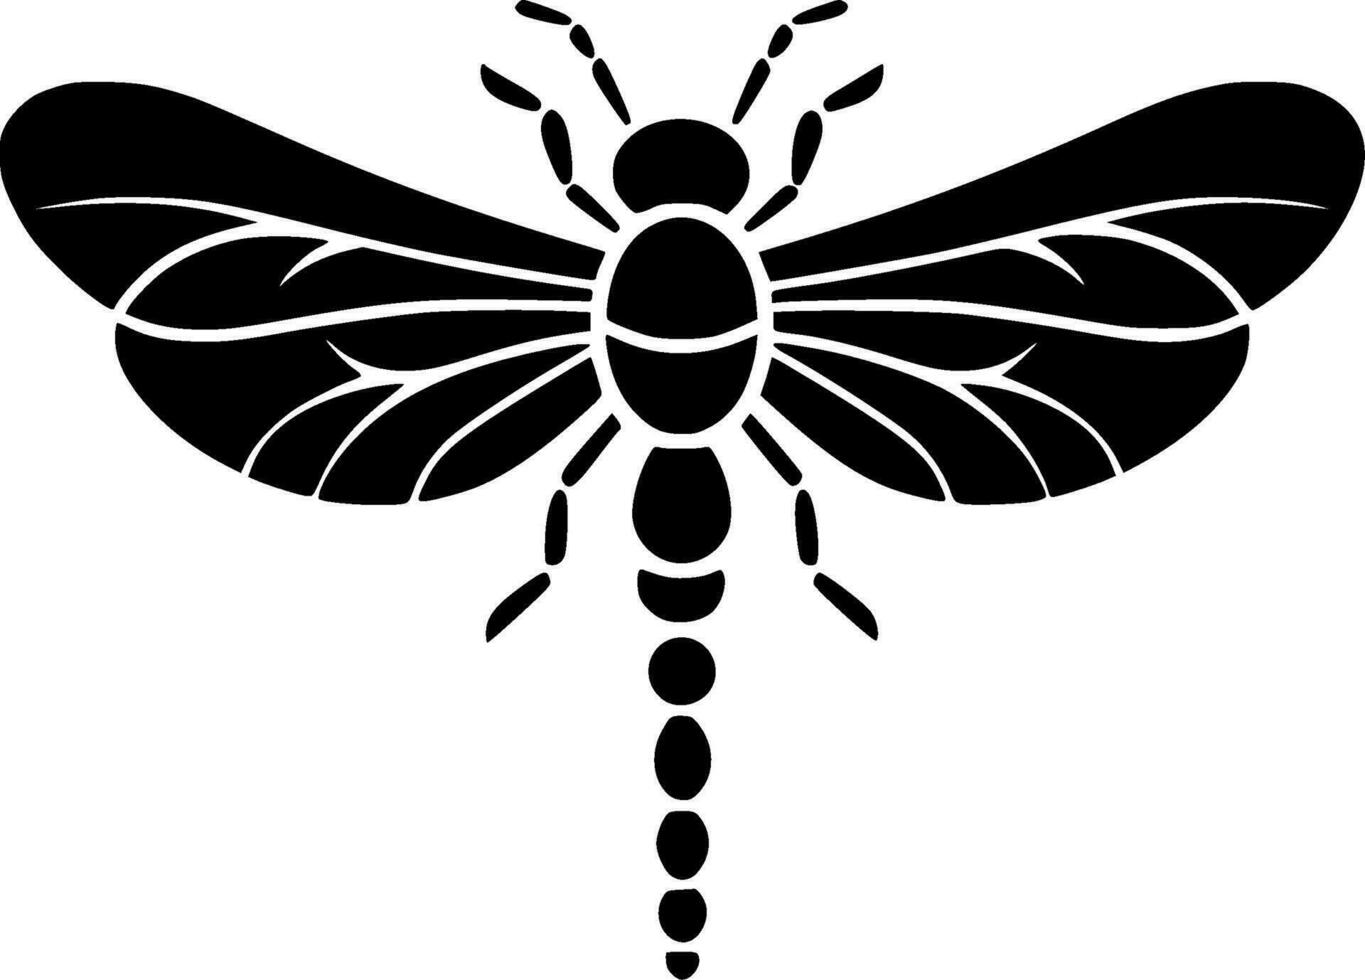 Dragonfly, Black and White Vector illustration